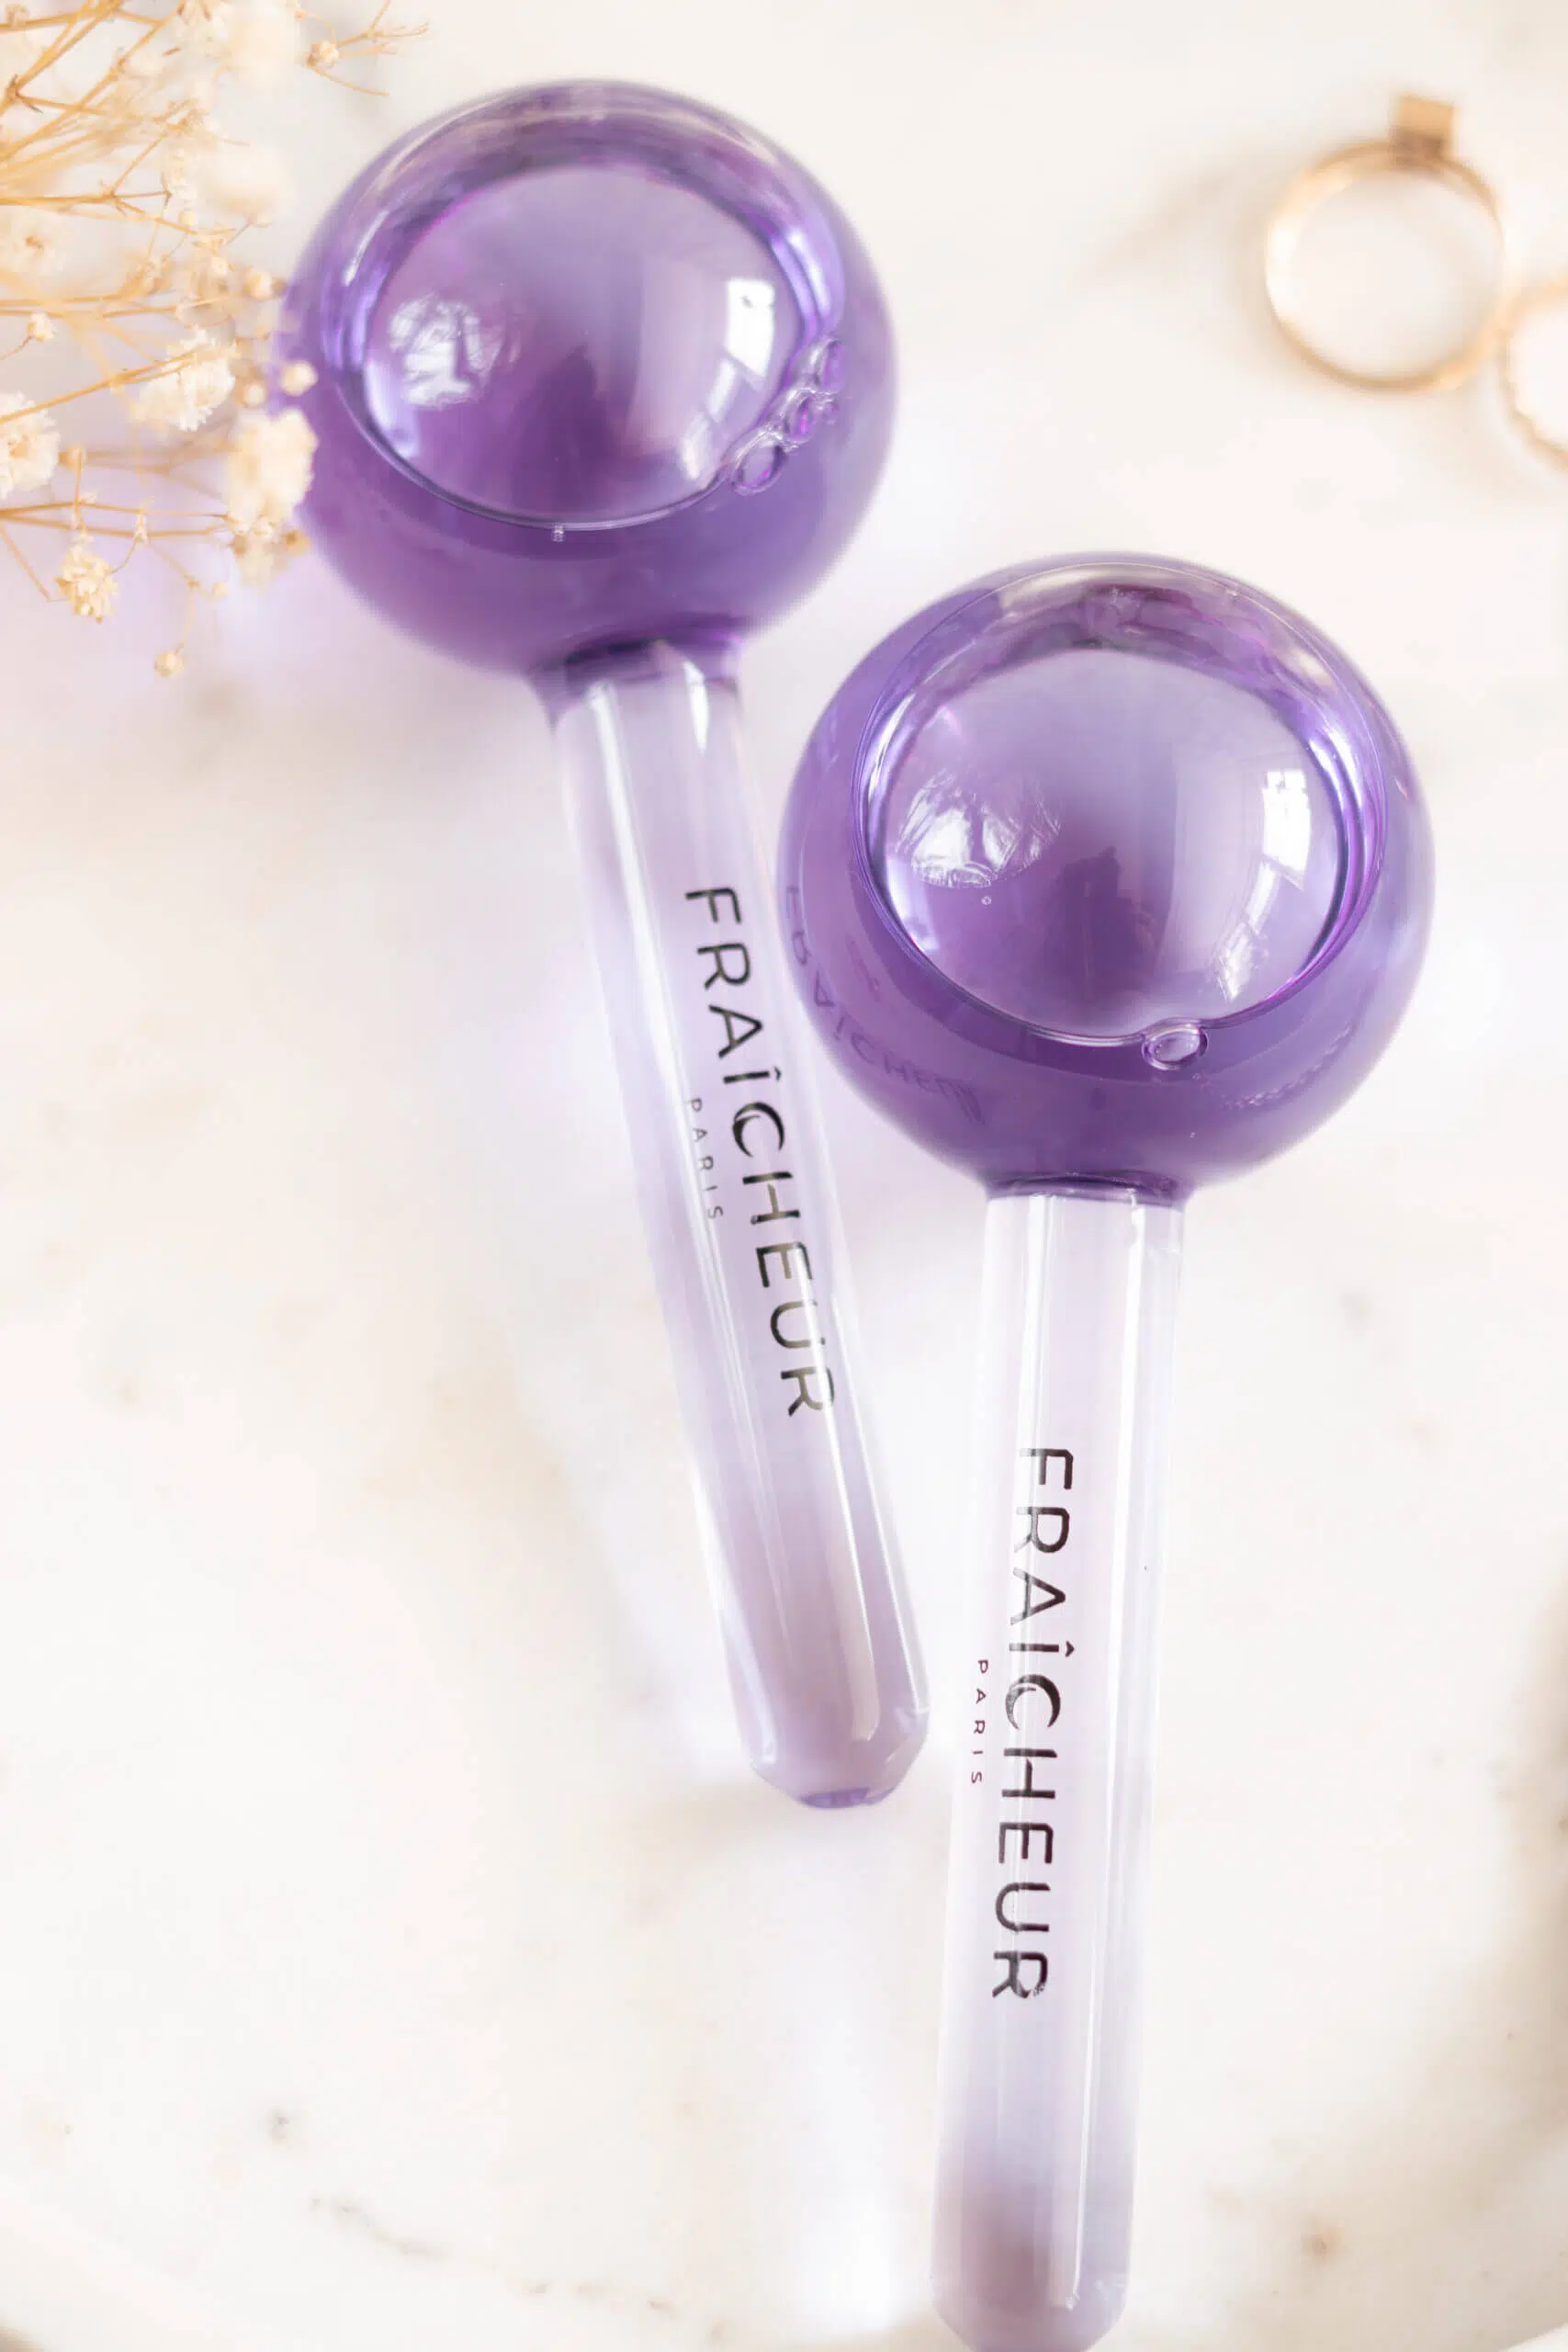 Use Fraîcheur Ice Globes For A Luxurious At-Home Spa Day